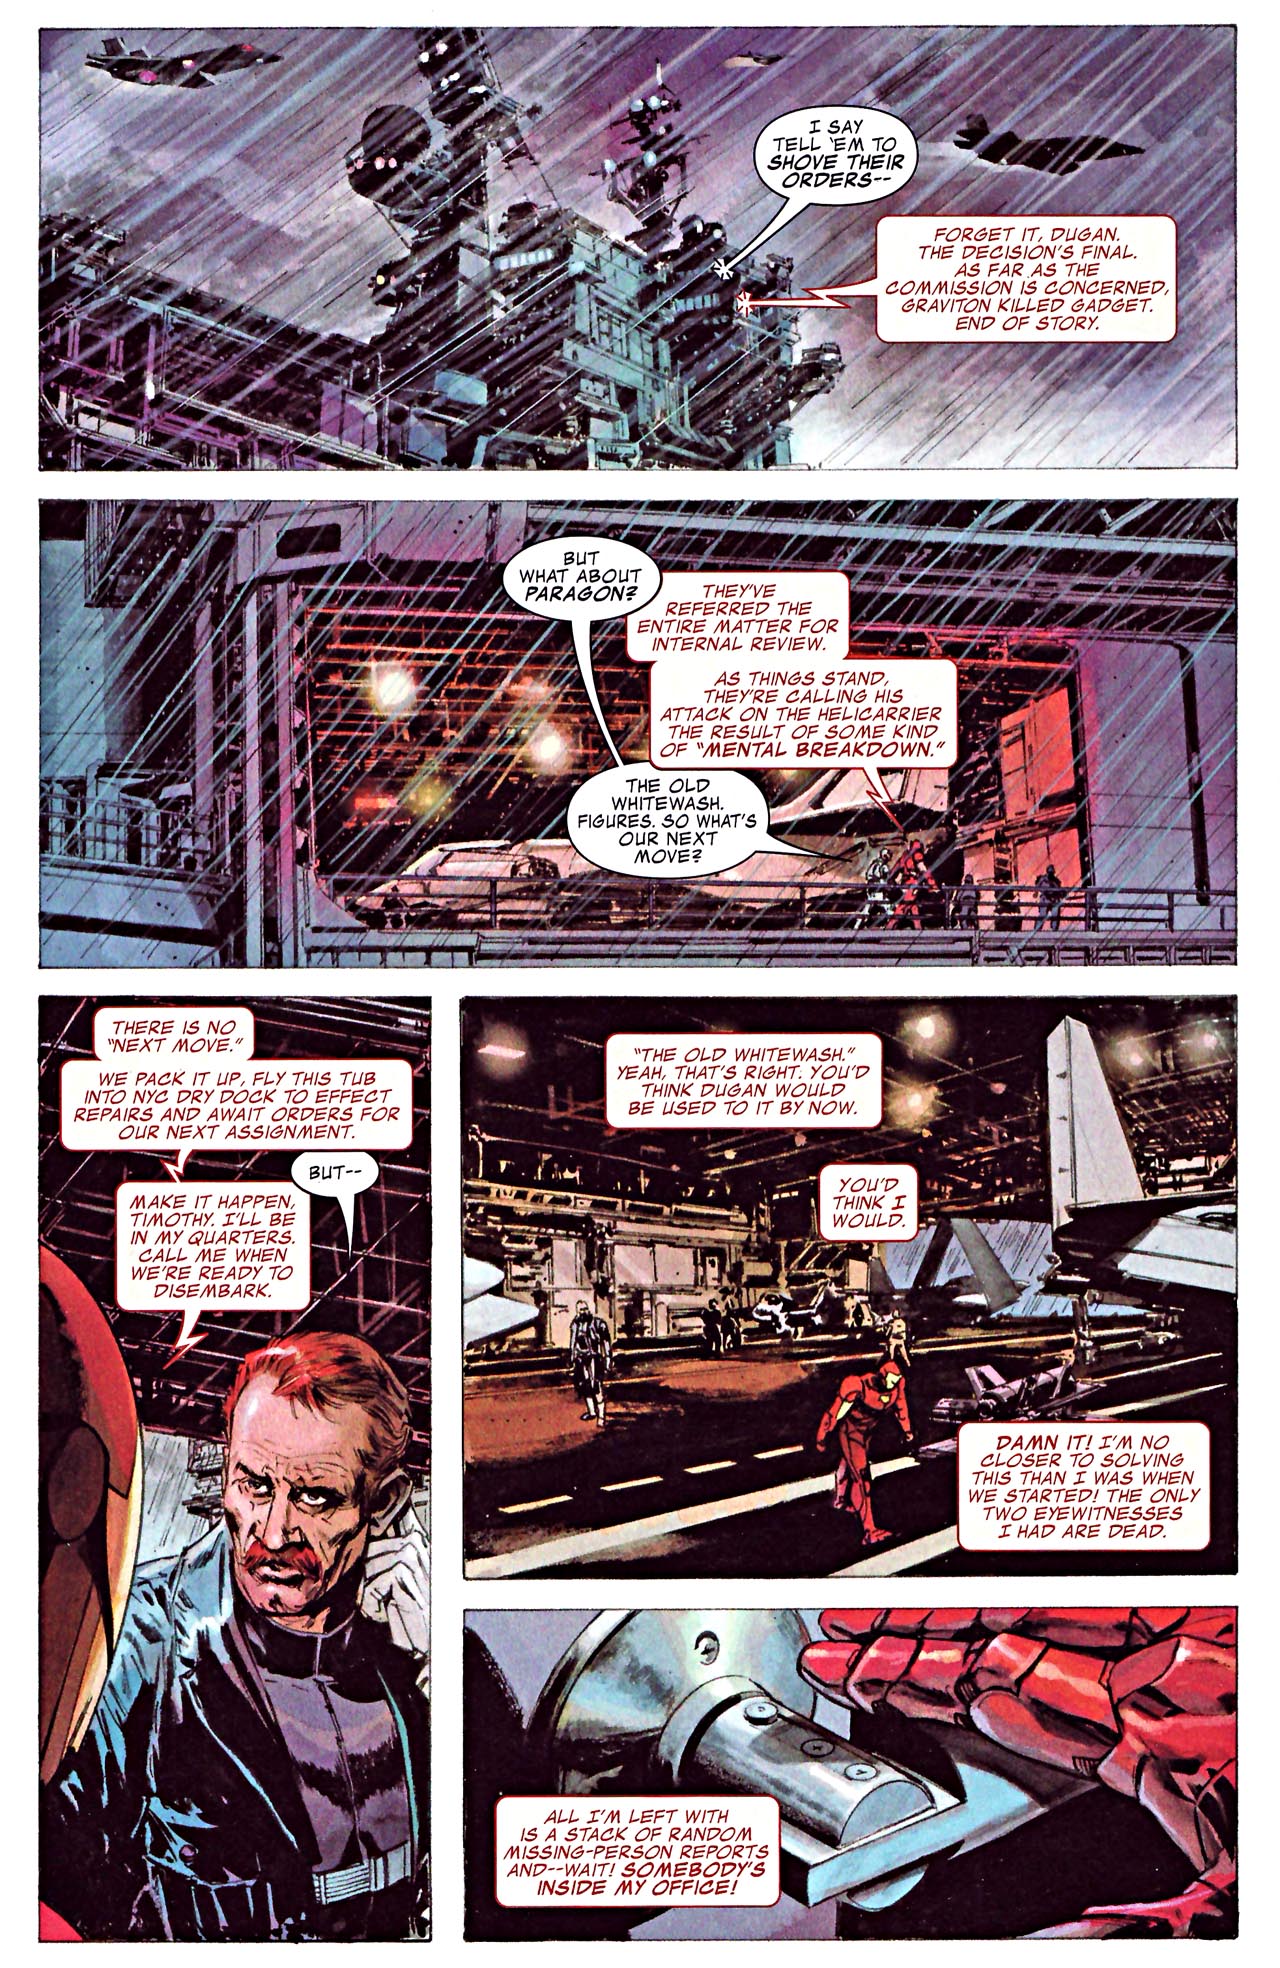 The Invincible Iron Man (2007) 23 Page 17